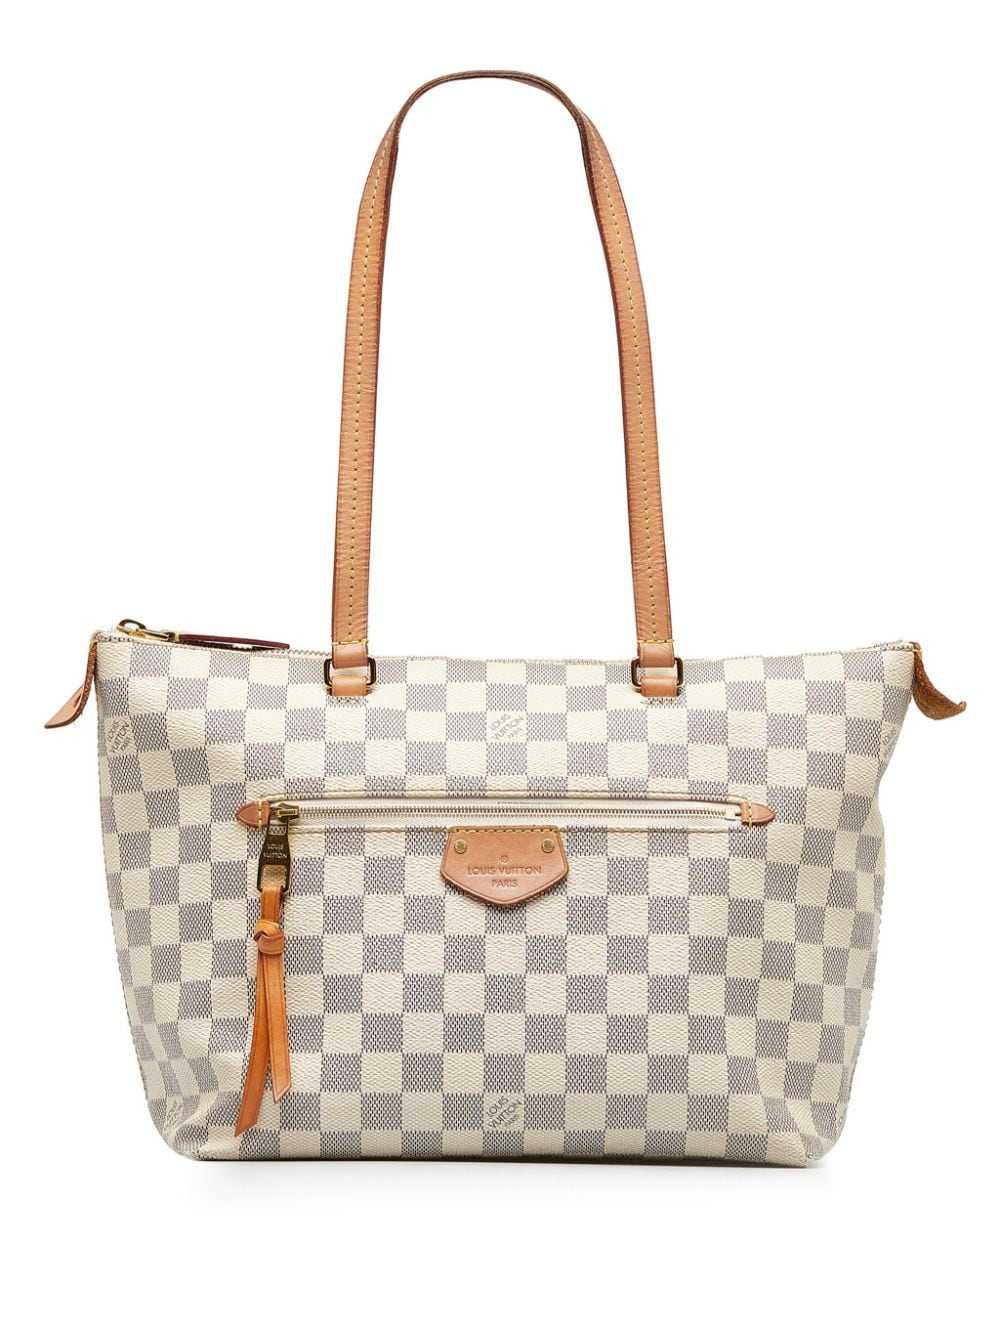 Louis Vuitton Pre-Owned 2019 pre-owned Damier Azu… - image 1